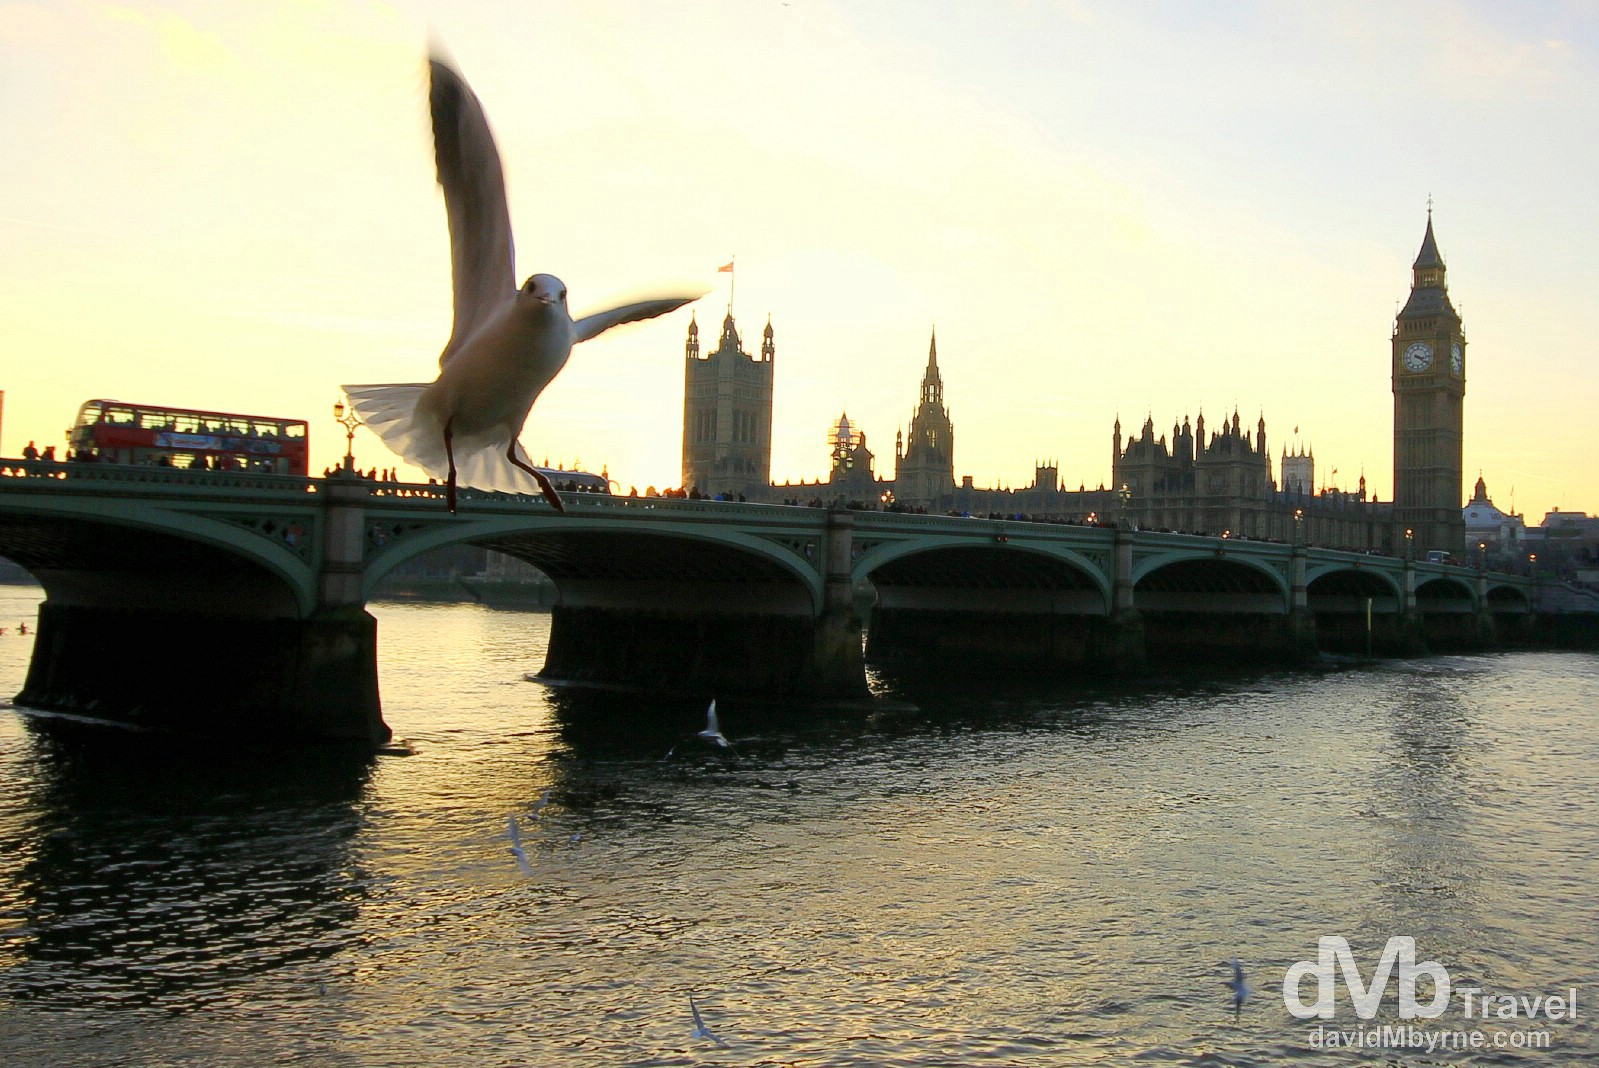 Birds flying by the banks of the River Thames with Westminster Bridge & the Houses of Parliament in the background. London, England. December 8th 2012.